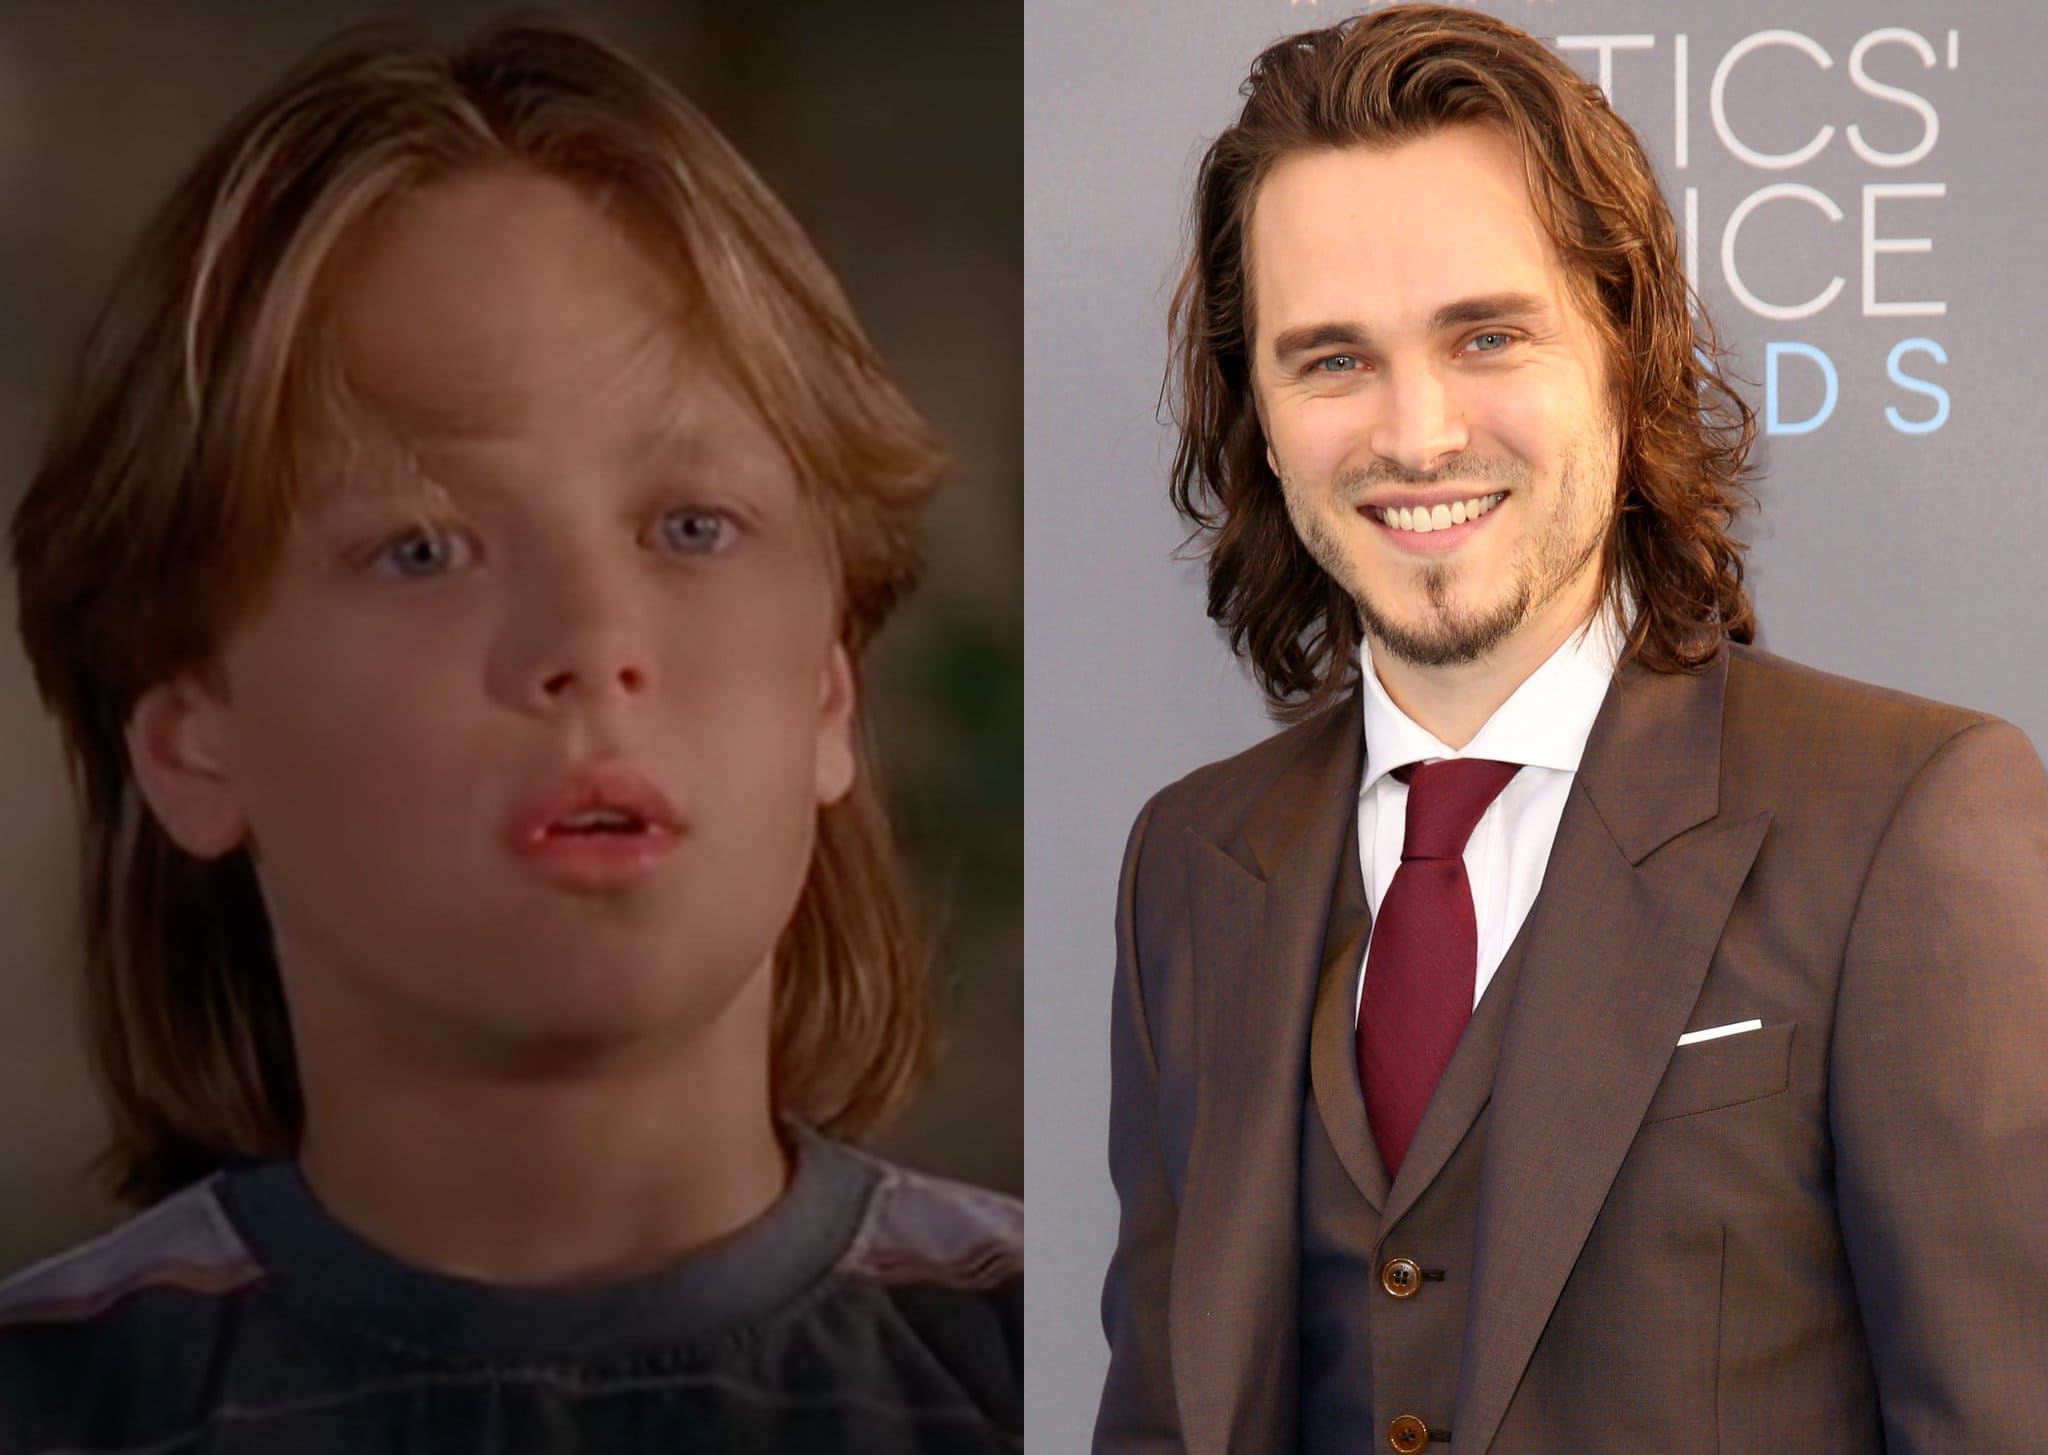 After Camp Nowhere, Jonathan Jackson went on to star in several films and television shows like General Hospital, Tuck Everlasting and Nashville